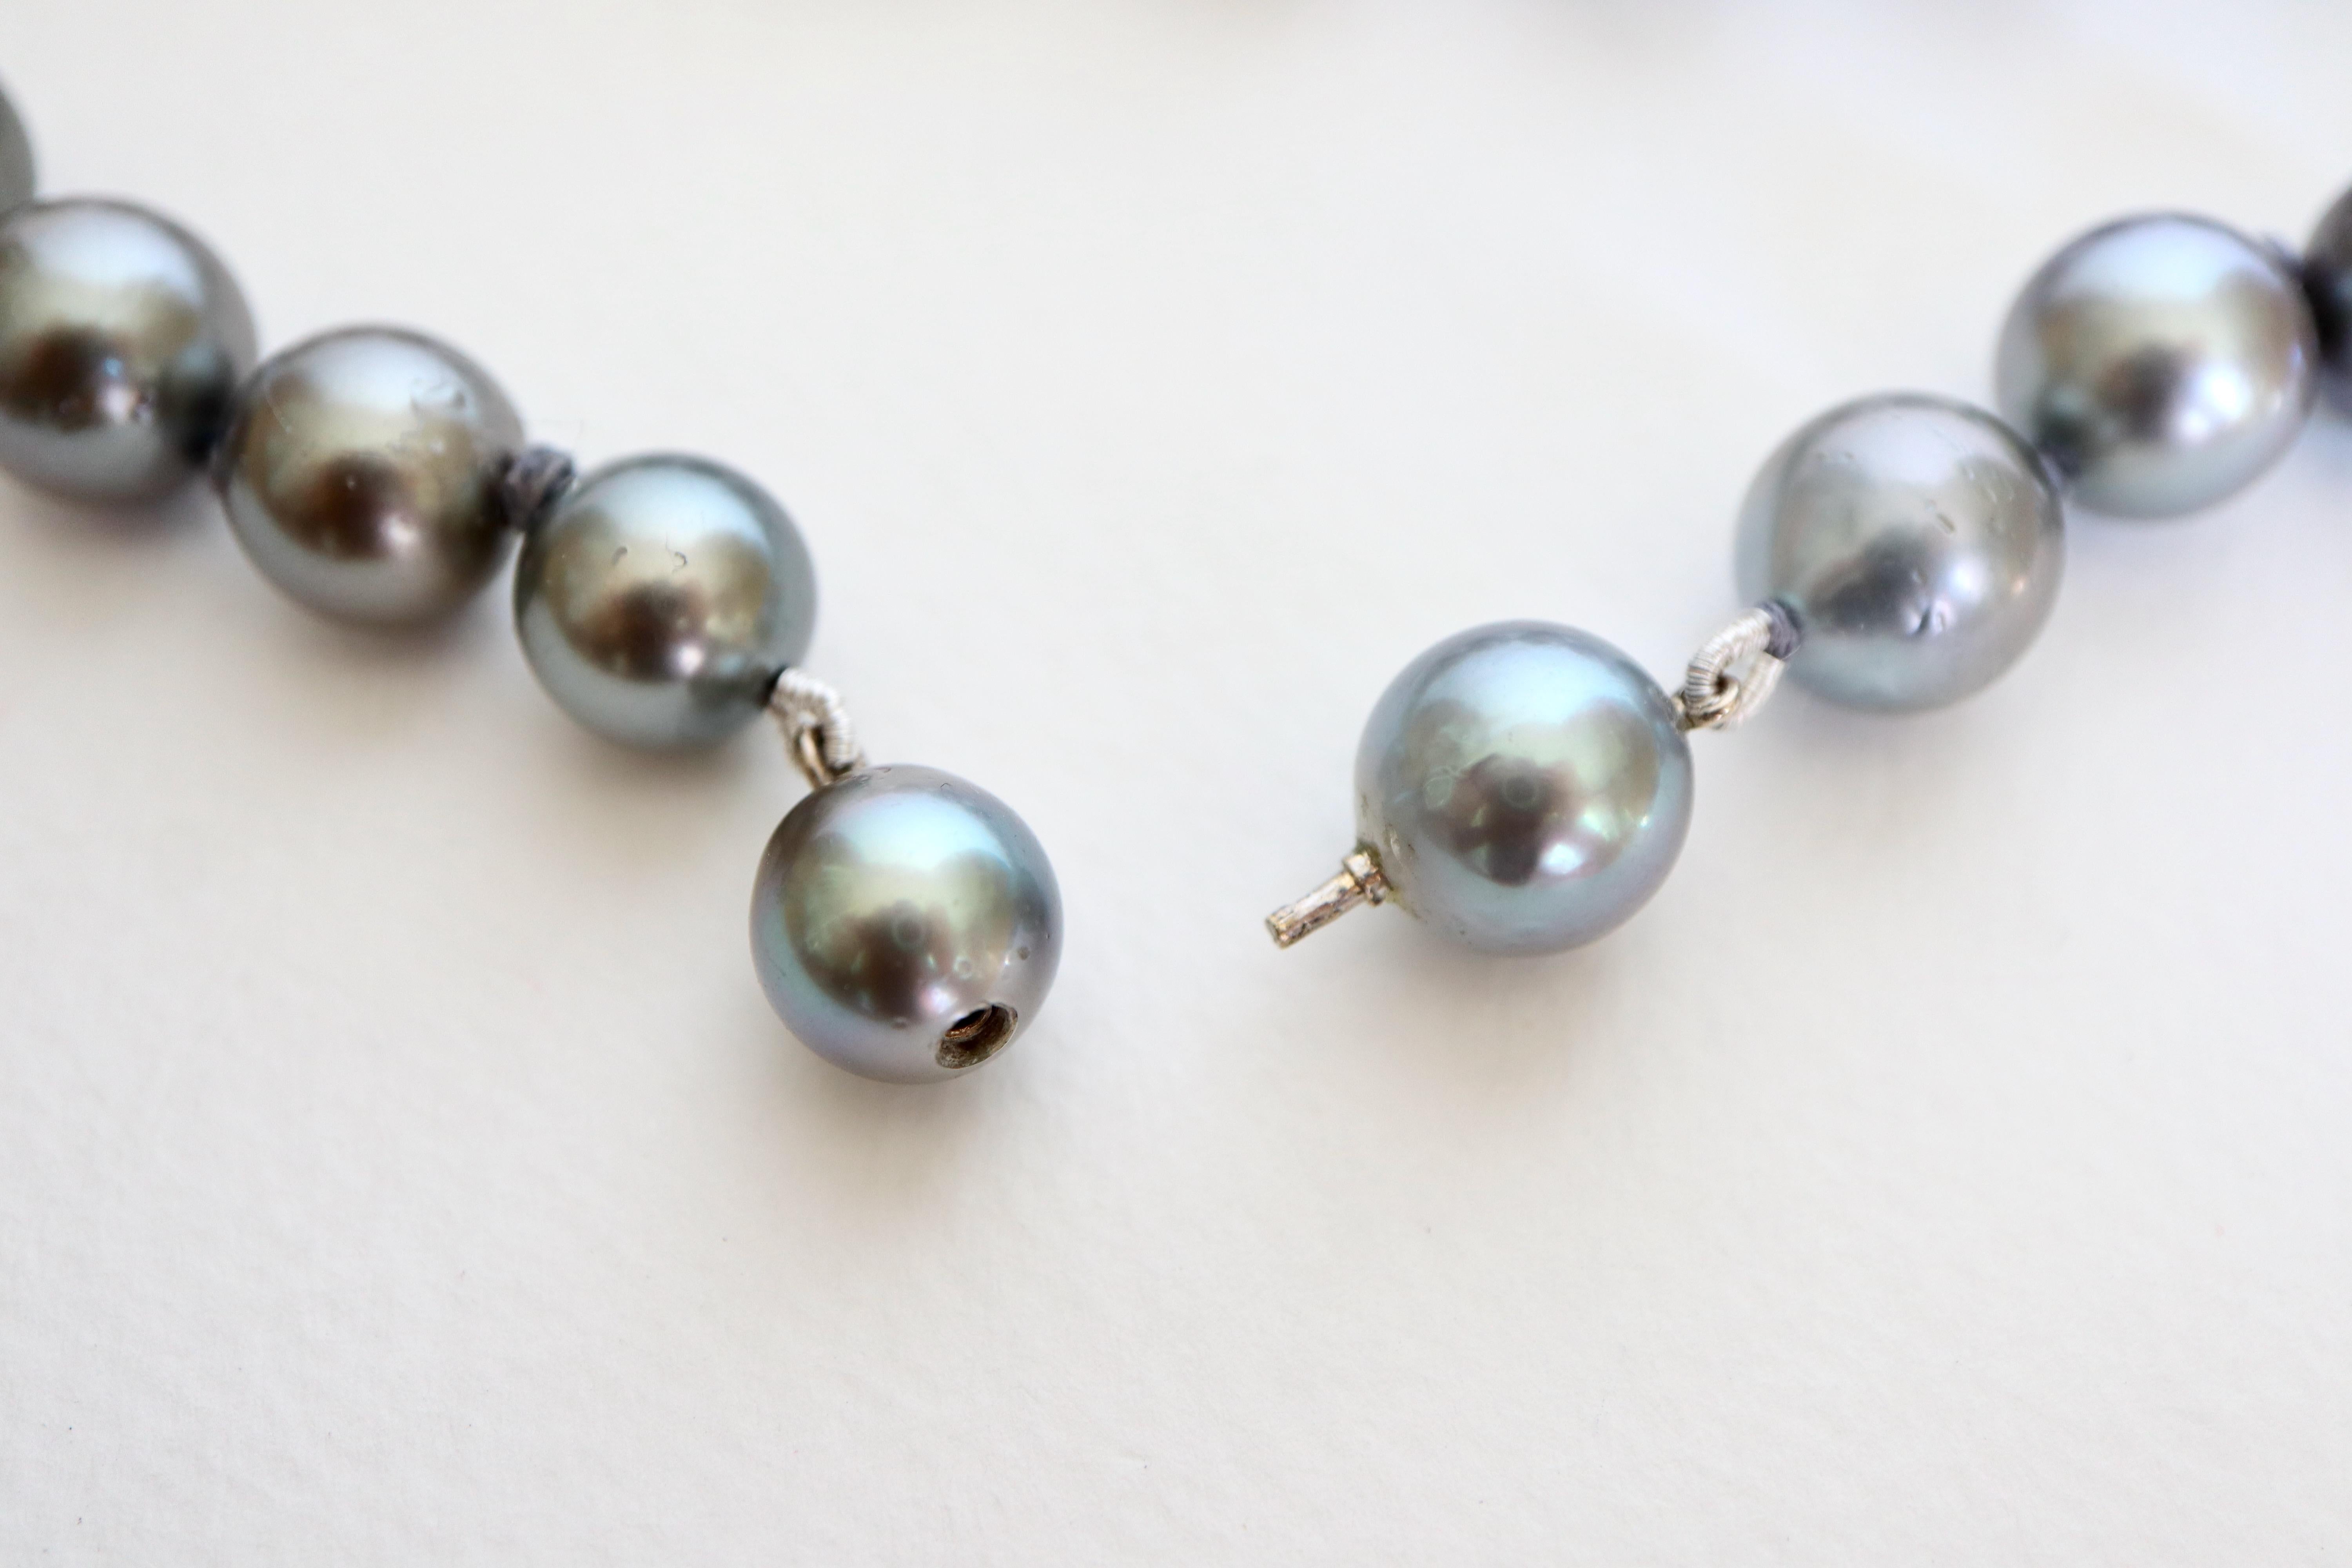 Women's Necklace of Cultured Grey Pearls 9 mm to 13 mm For Sale